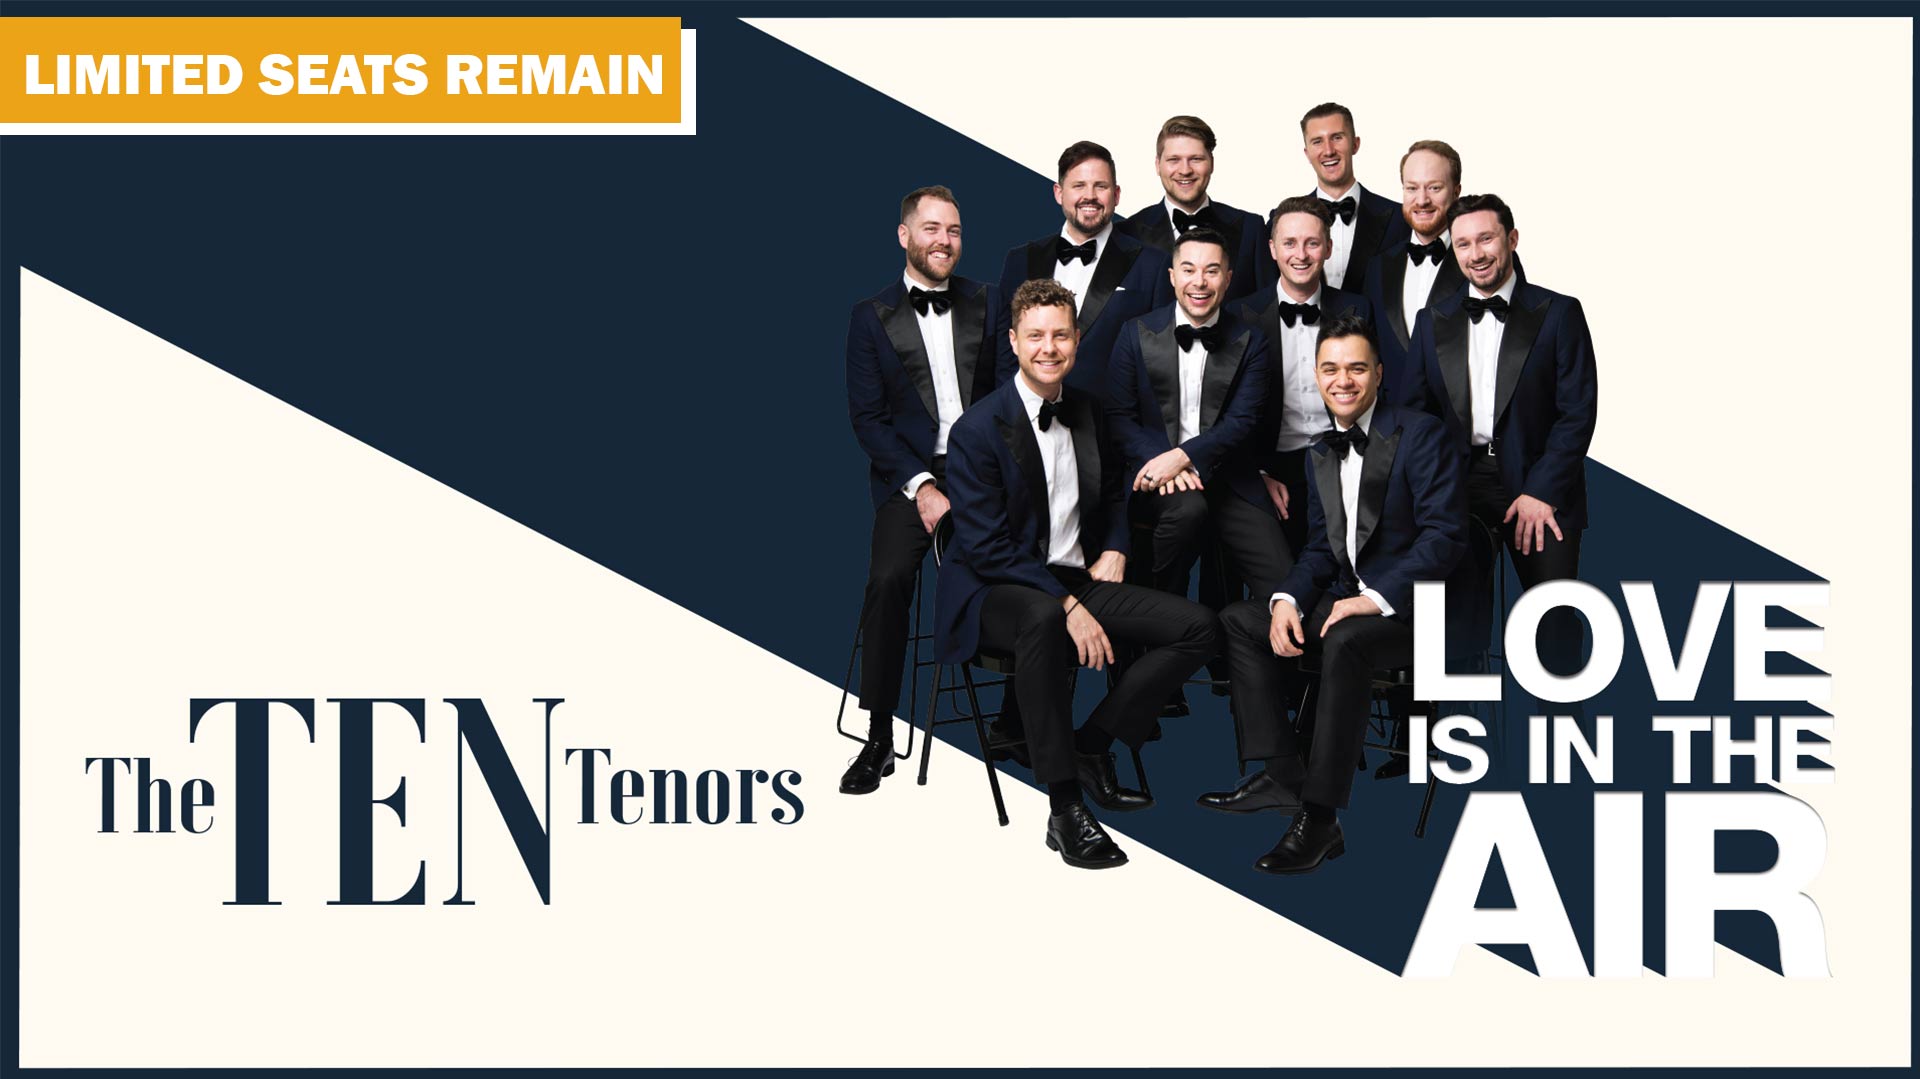 The TEN Tenors - Limited Seats Remain